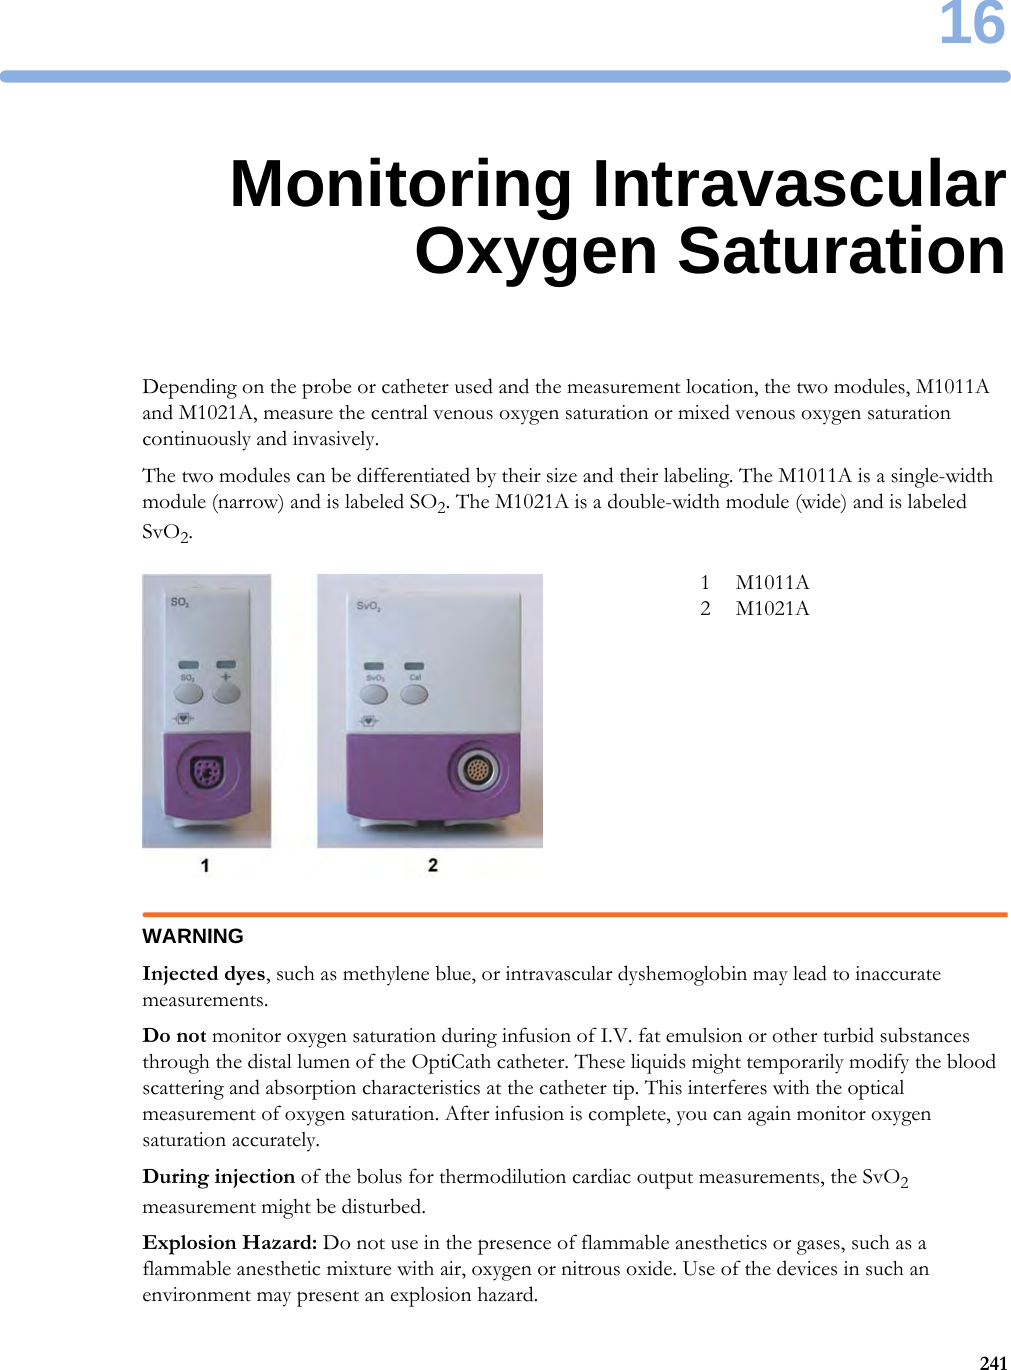 1624116Monitoring IntravascularOxygen SaturationDepending on the probe or catheter used and the measurement location, the two modules, M1011A and M1021A, measure the central venous oxygen saturation or mixed venous oxygen saturation continuously and invasively.The two modules can be differentiated by their size and their labeling. The M1011A is a single-width module (narrow) and is labeled SO2. The M1021A is a double-width module (wide) and is labeled SvO2.WARNINGInjected dyes, such as methylene blue, or intravascular dyshemoglobin may lead to inaccurate measurements.Do not monitor oxygen saturation during infusion of I.V. fat emulsion or other turbid substances through the distal lumen of the OptiCath catheter. These liquids might temporarily modify the blood scattering and absorption characteristics at the catheter tip. This interferes with the optical measurement of oxygen saturation. After infusion is complete, you can again monitor oxygen saturation accurately.During injection of the bolus for thermodilution cardiac output measurements, the SvO2 measurement might be disturbed.Explosion Hazard: Do not use in the presence of flammable anesthetics or gases, such as a flammable anesthetic mixture with air, oxygen or nitrous oxide. Use of the devices in such an environment may present an explosion hazard.1 M1011A2 M1021A